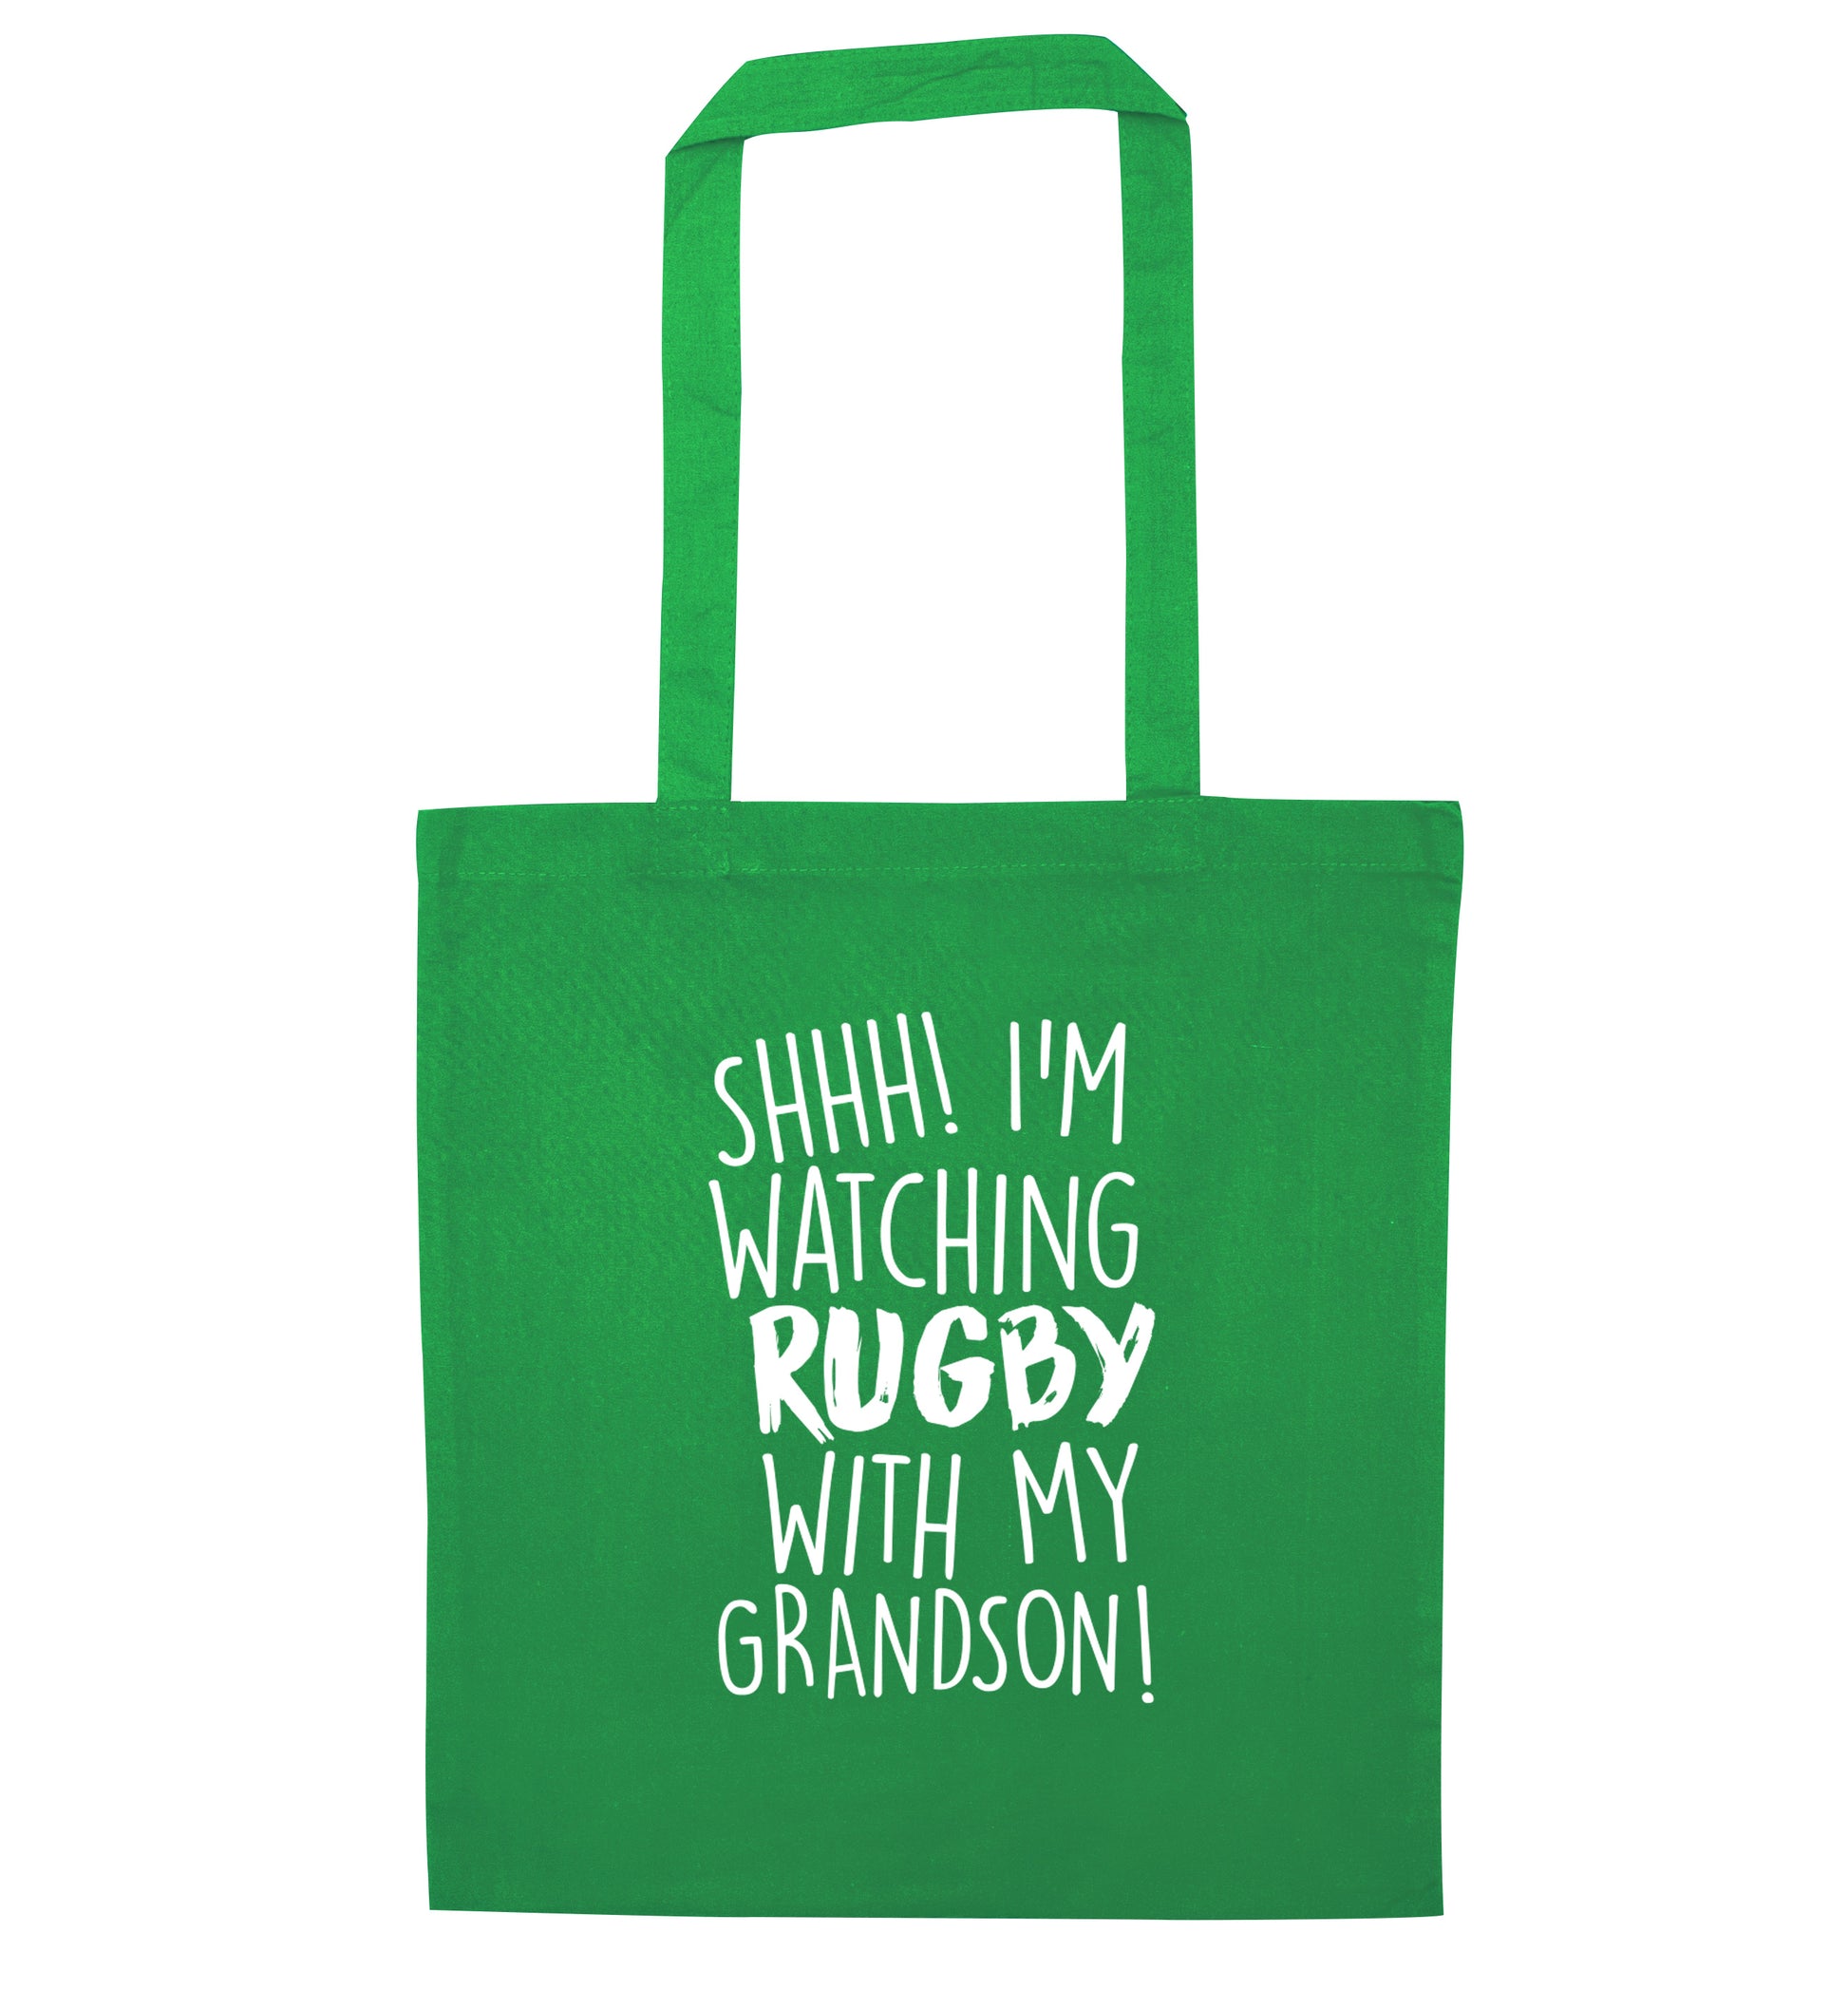 Shh I'm watching rugby with my grandson green tote bag